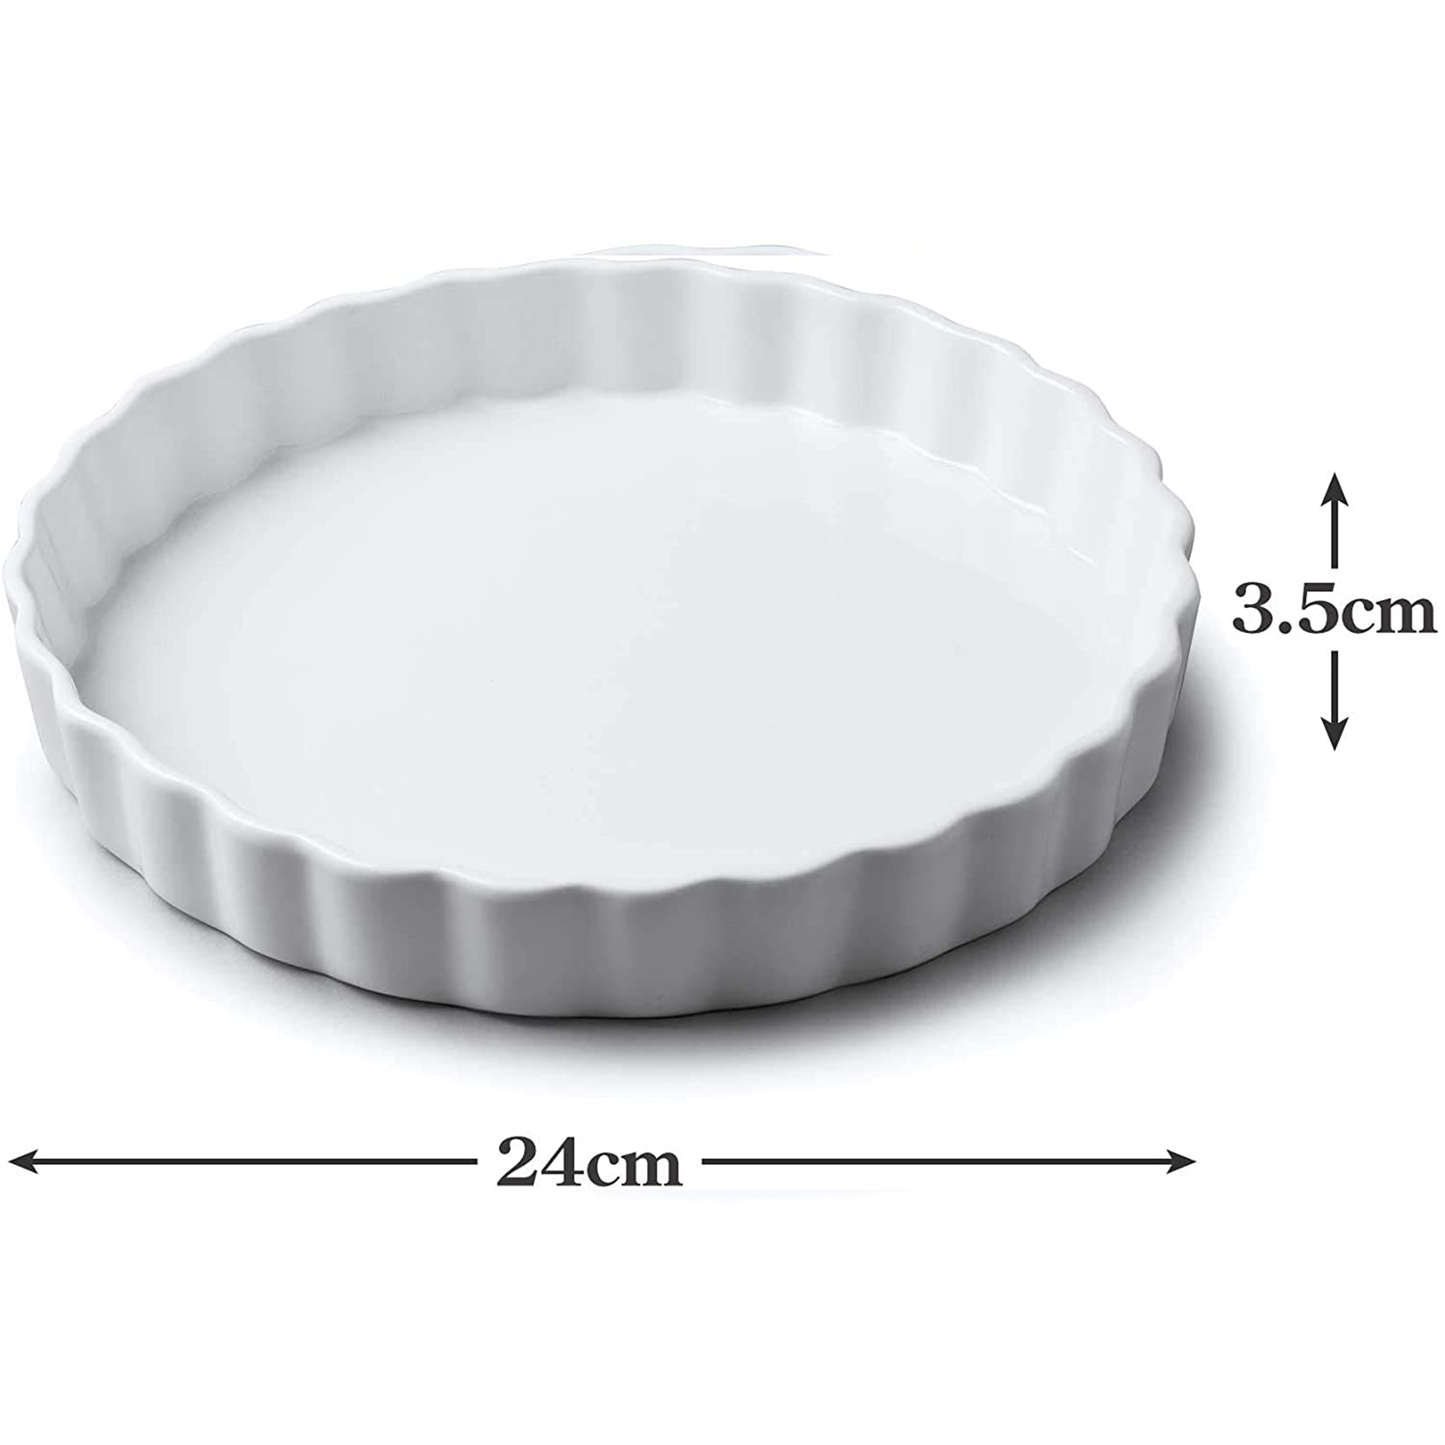 an image depicting the dimensions of the flan dish